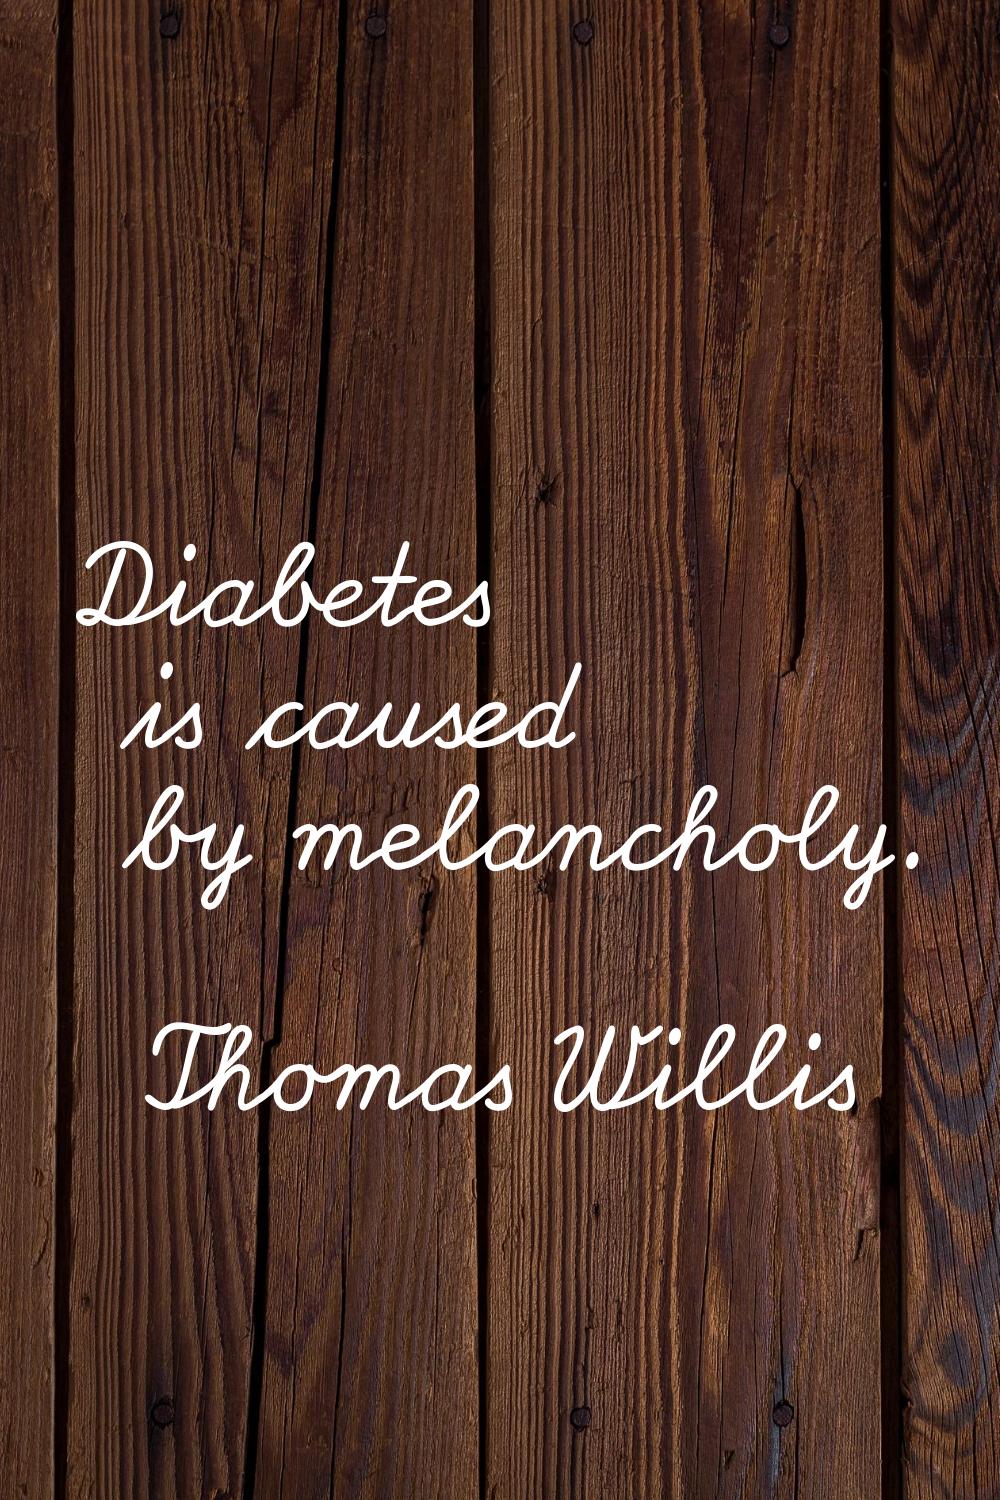 Diabetes is caused by melancholy.